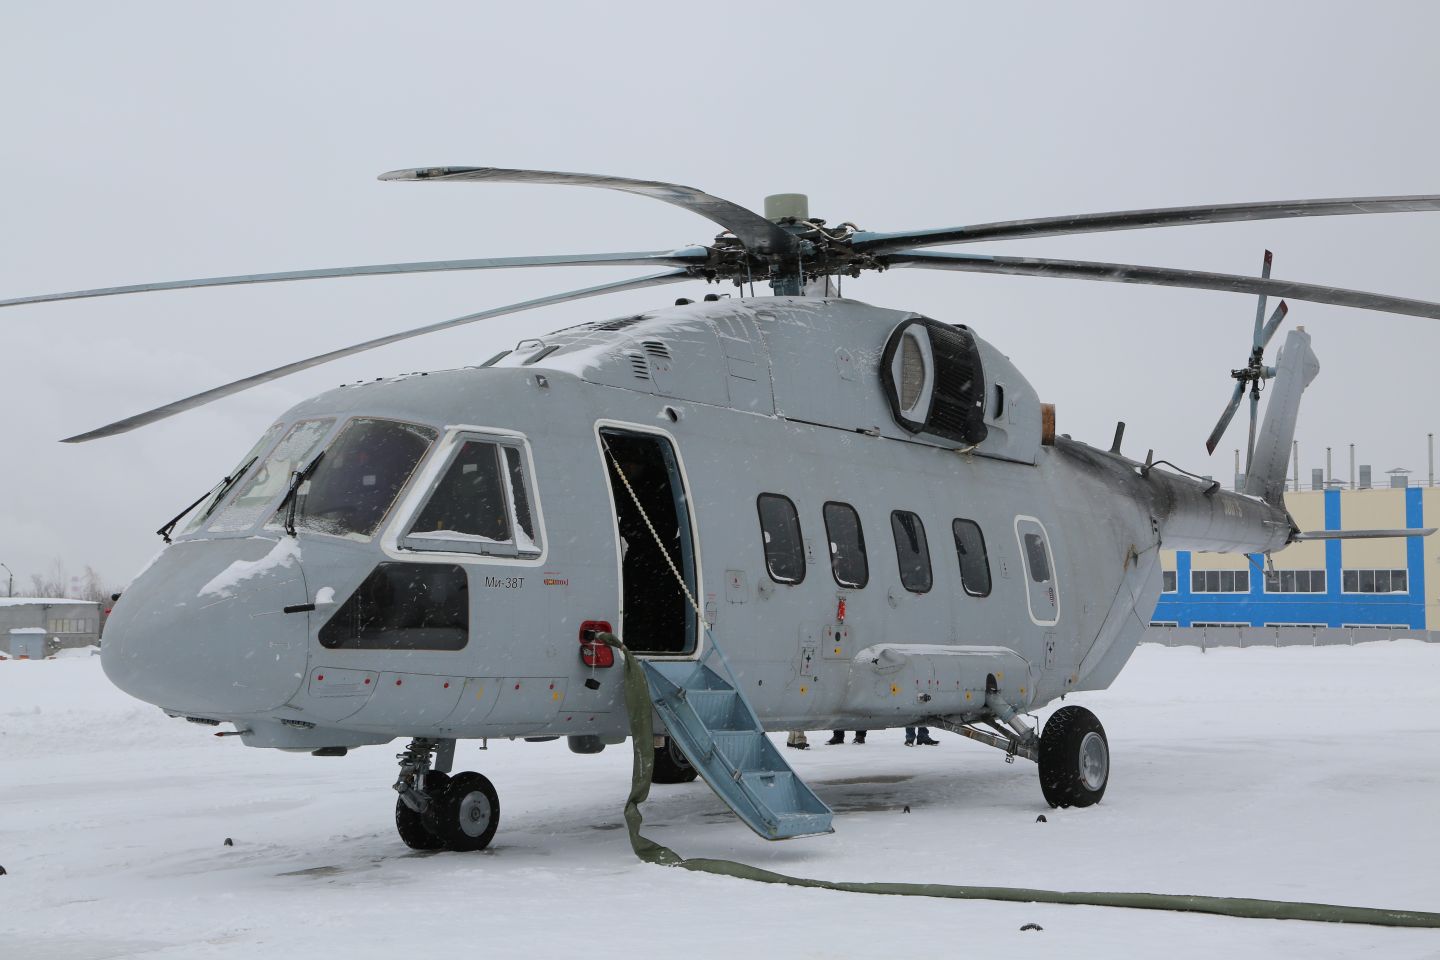 The Mi-38T transport-assault helicopter. (Russian Helicopters)